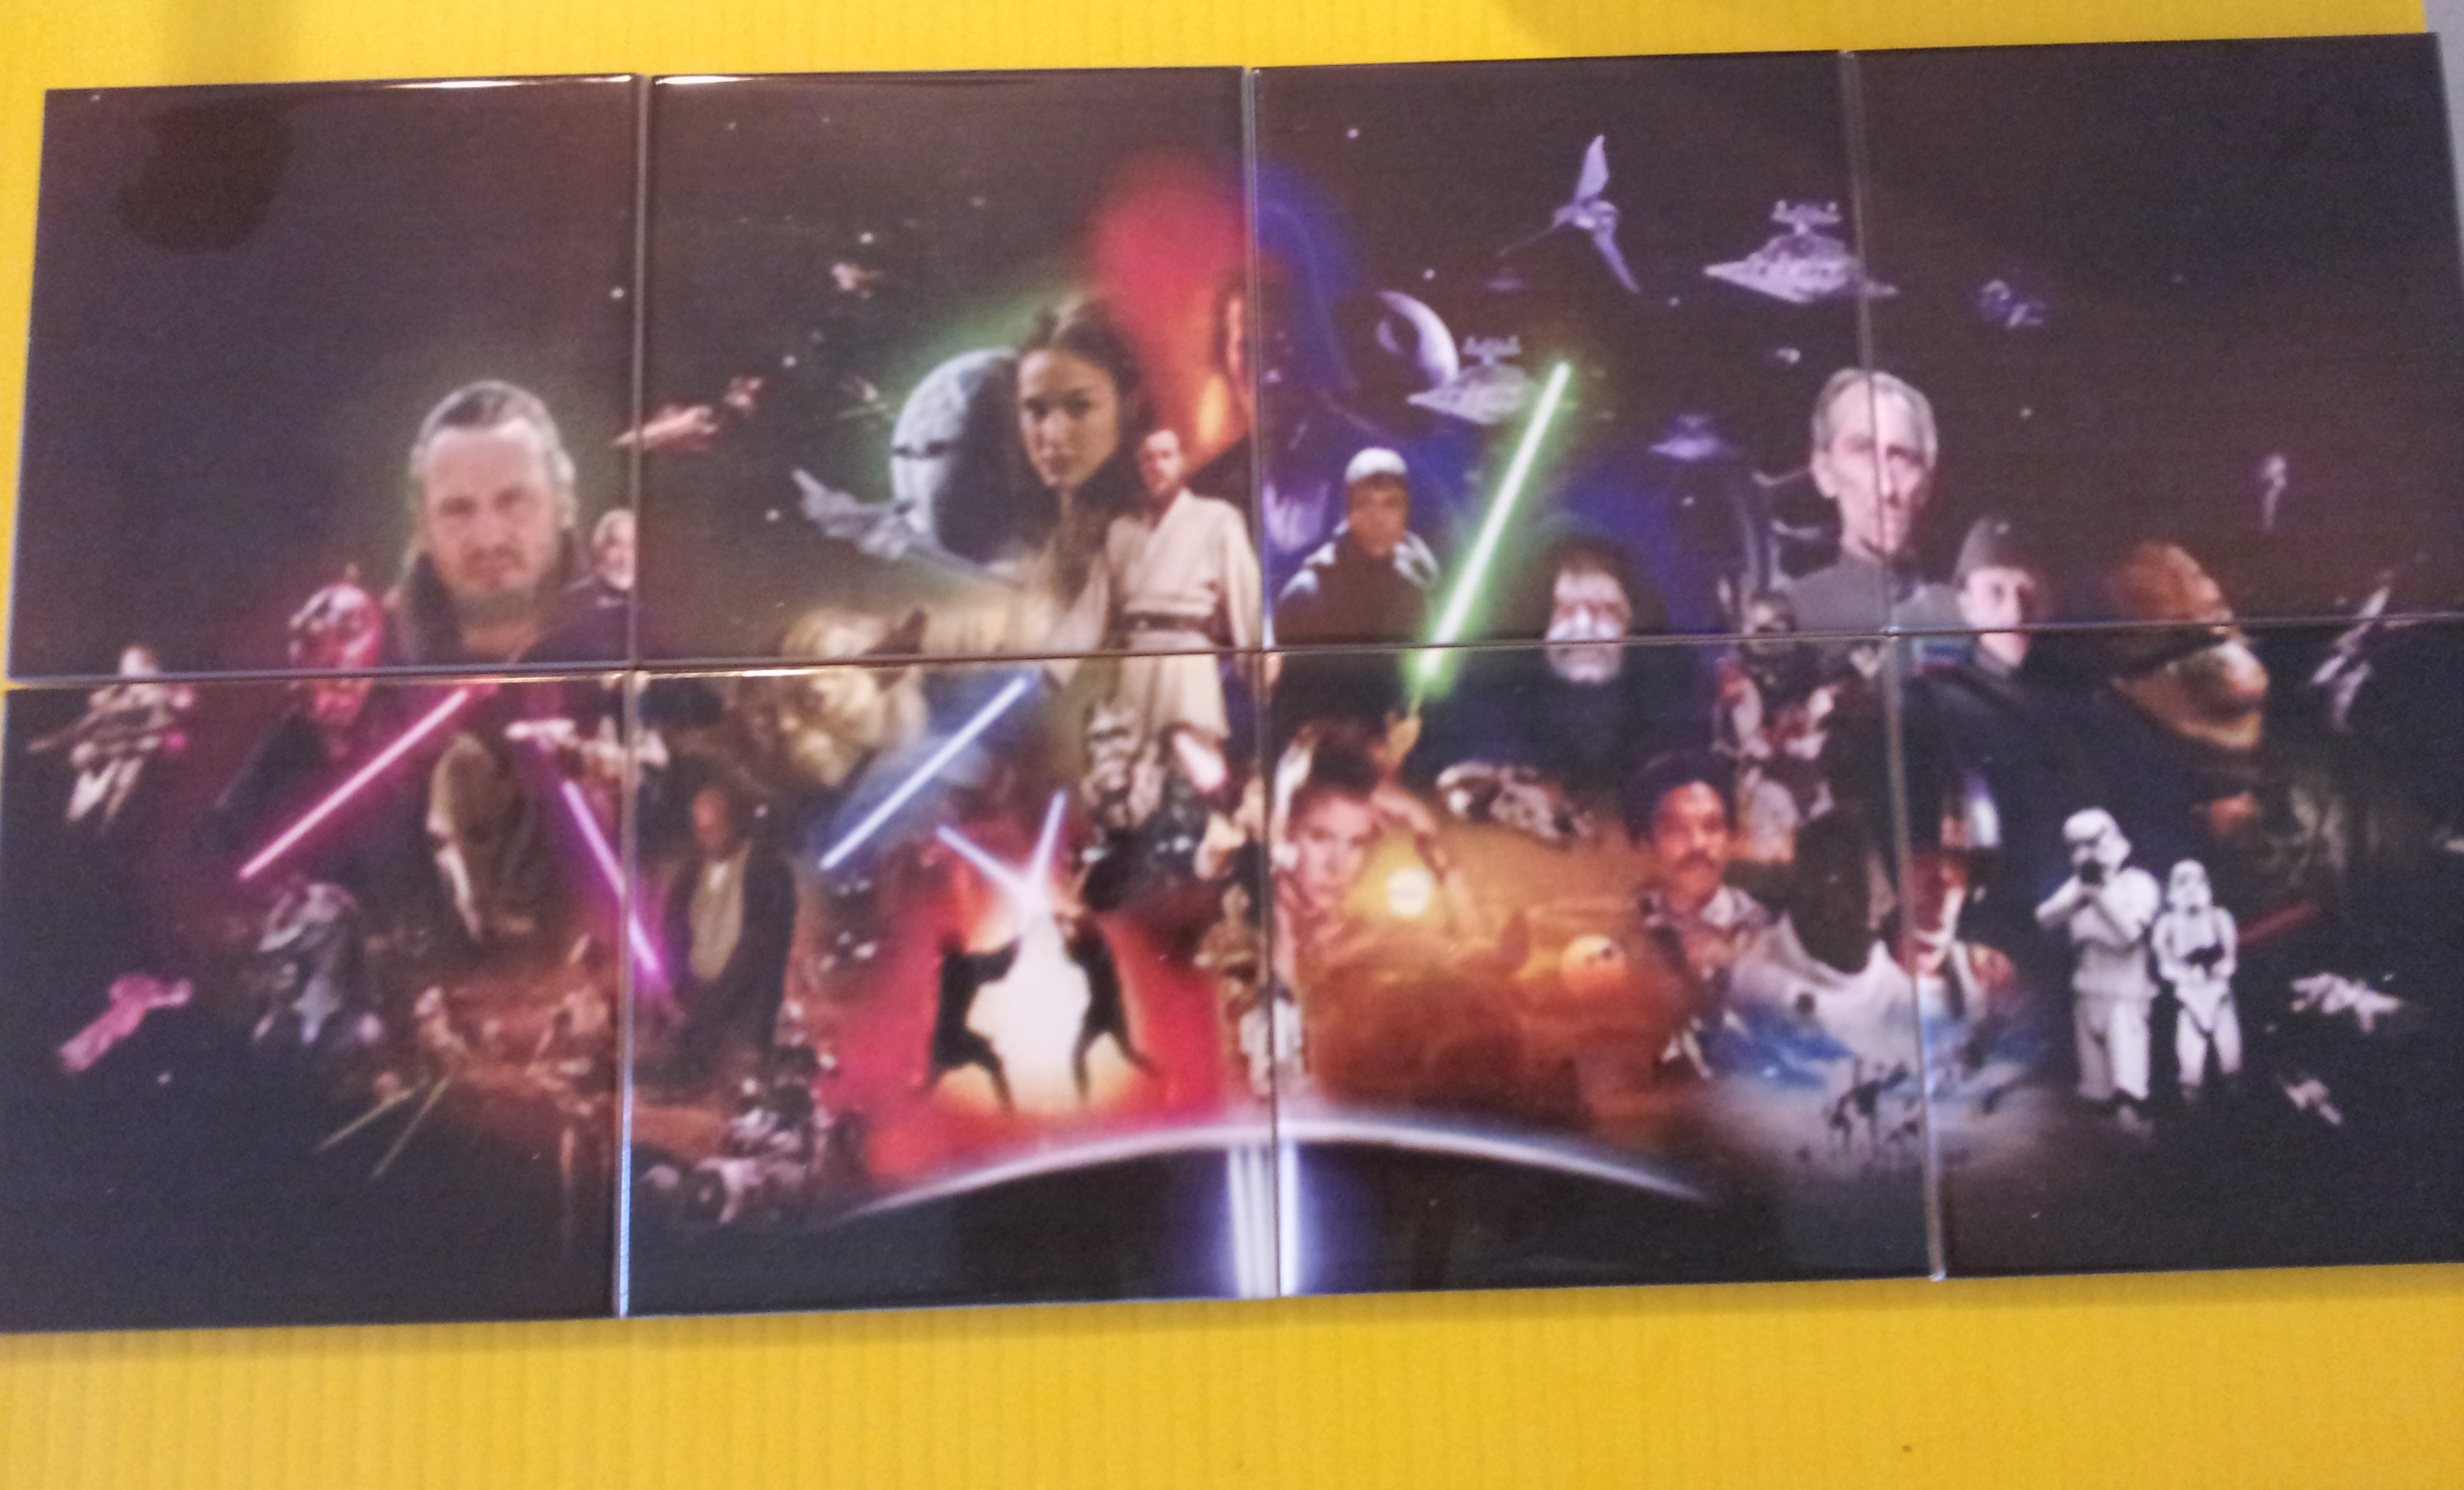 Star Wars 7 Tile Mural made with sublimation printing